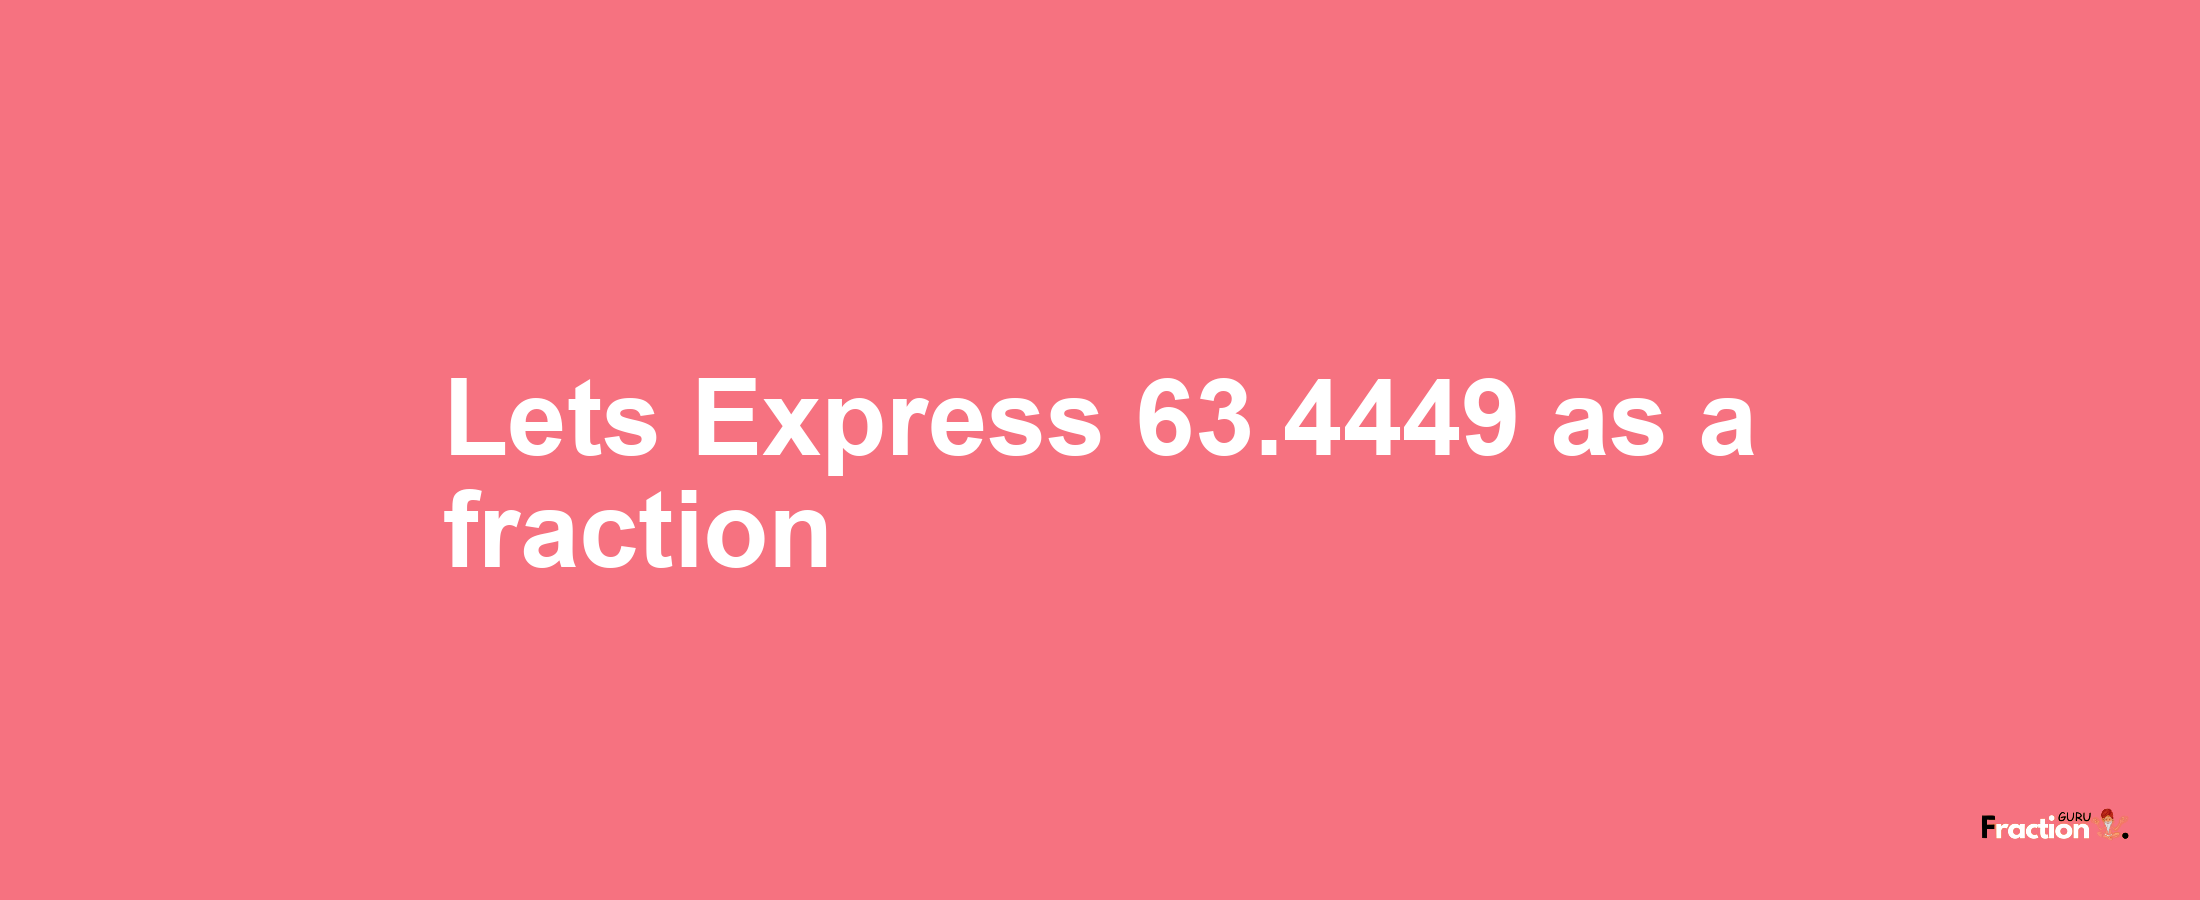 Lets Express 63.4449 as afraction